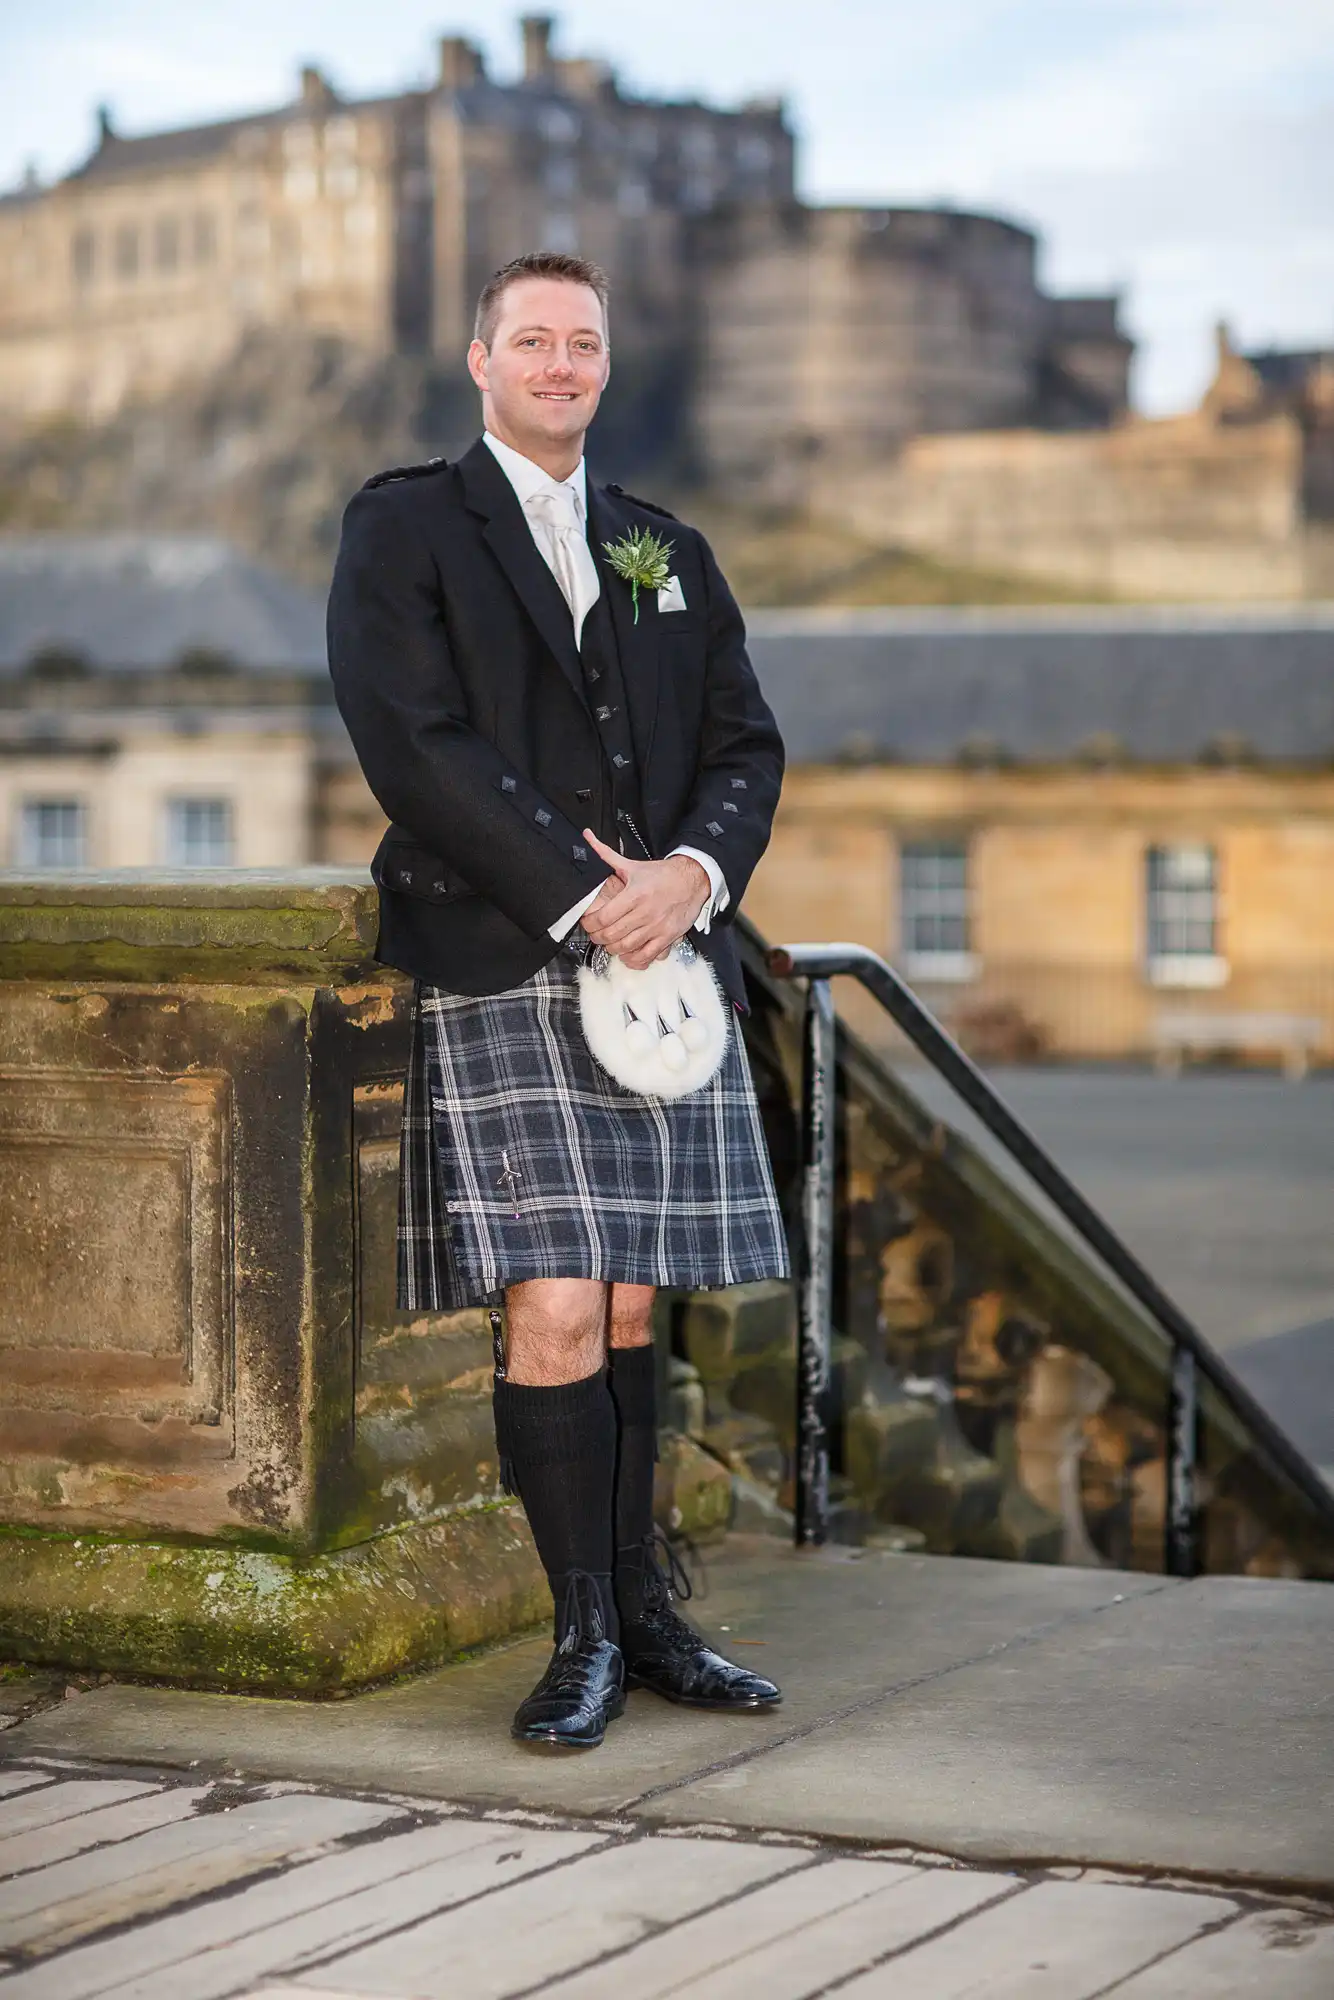 Man in a traditional scottish kilt and jacket, smiling, standing on a cobblestone path with edinburgh castle in the background.